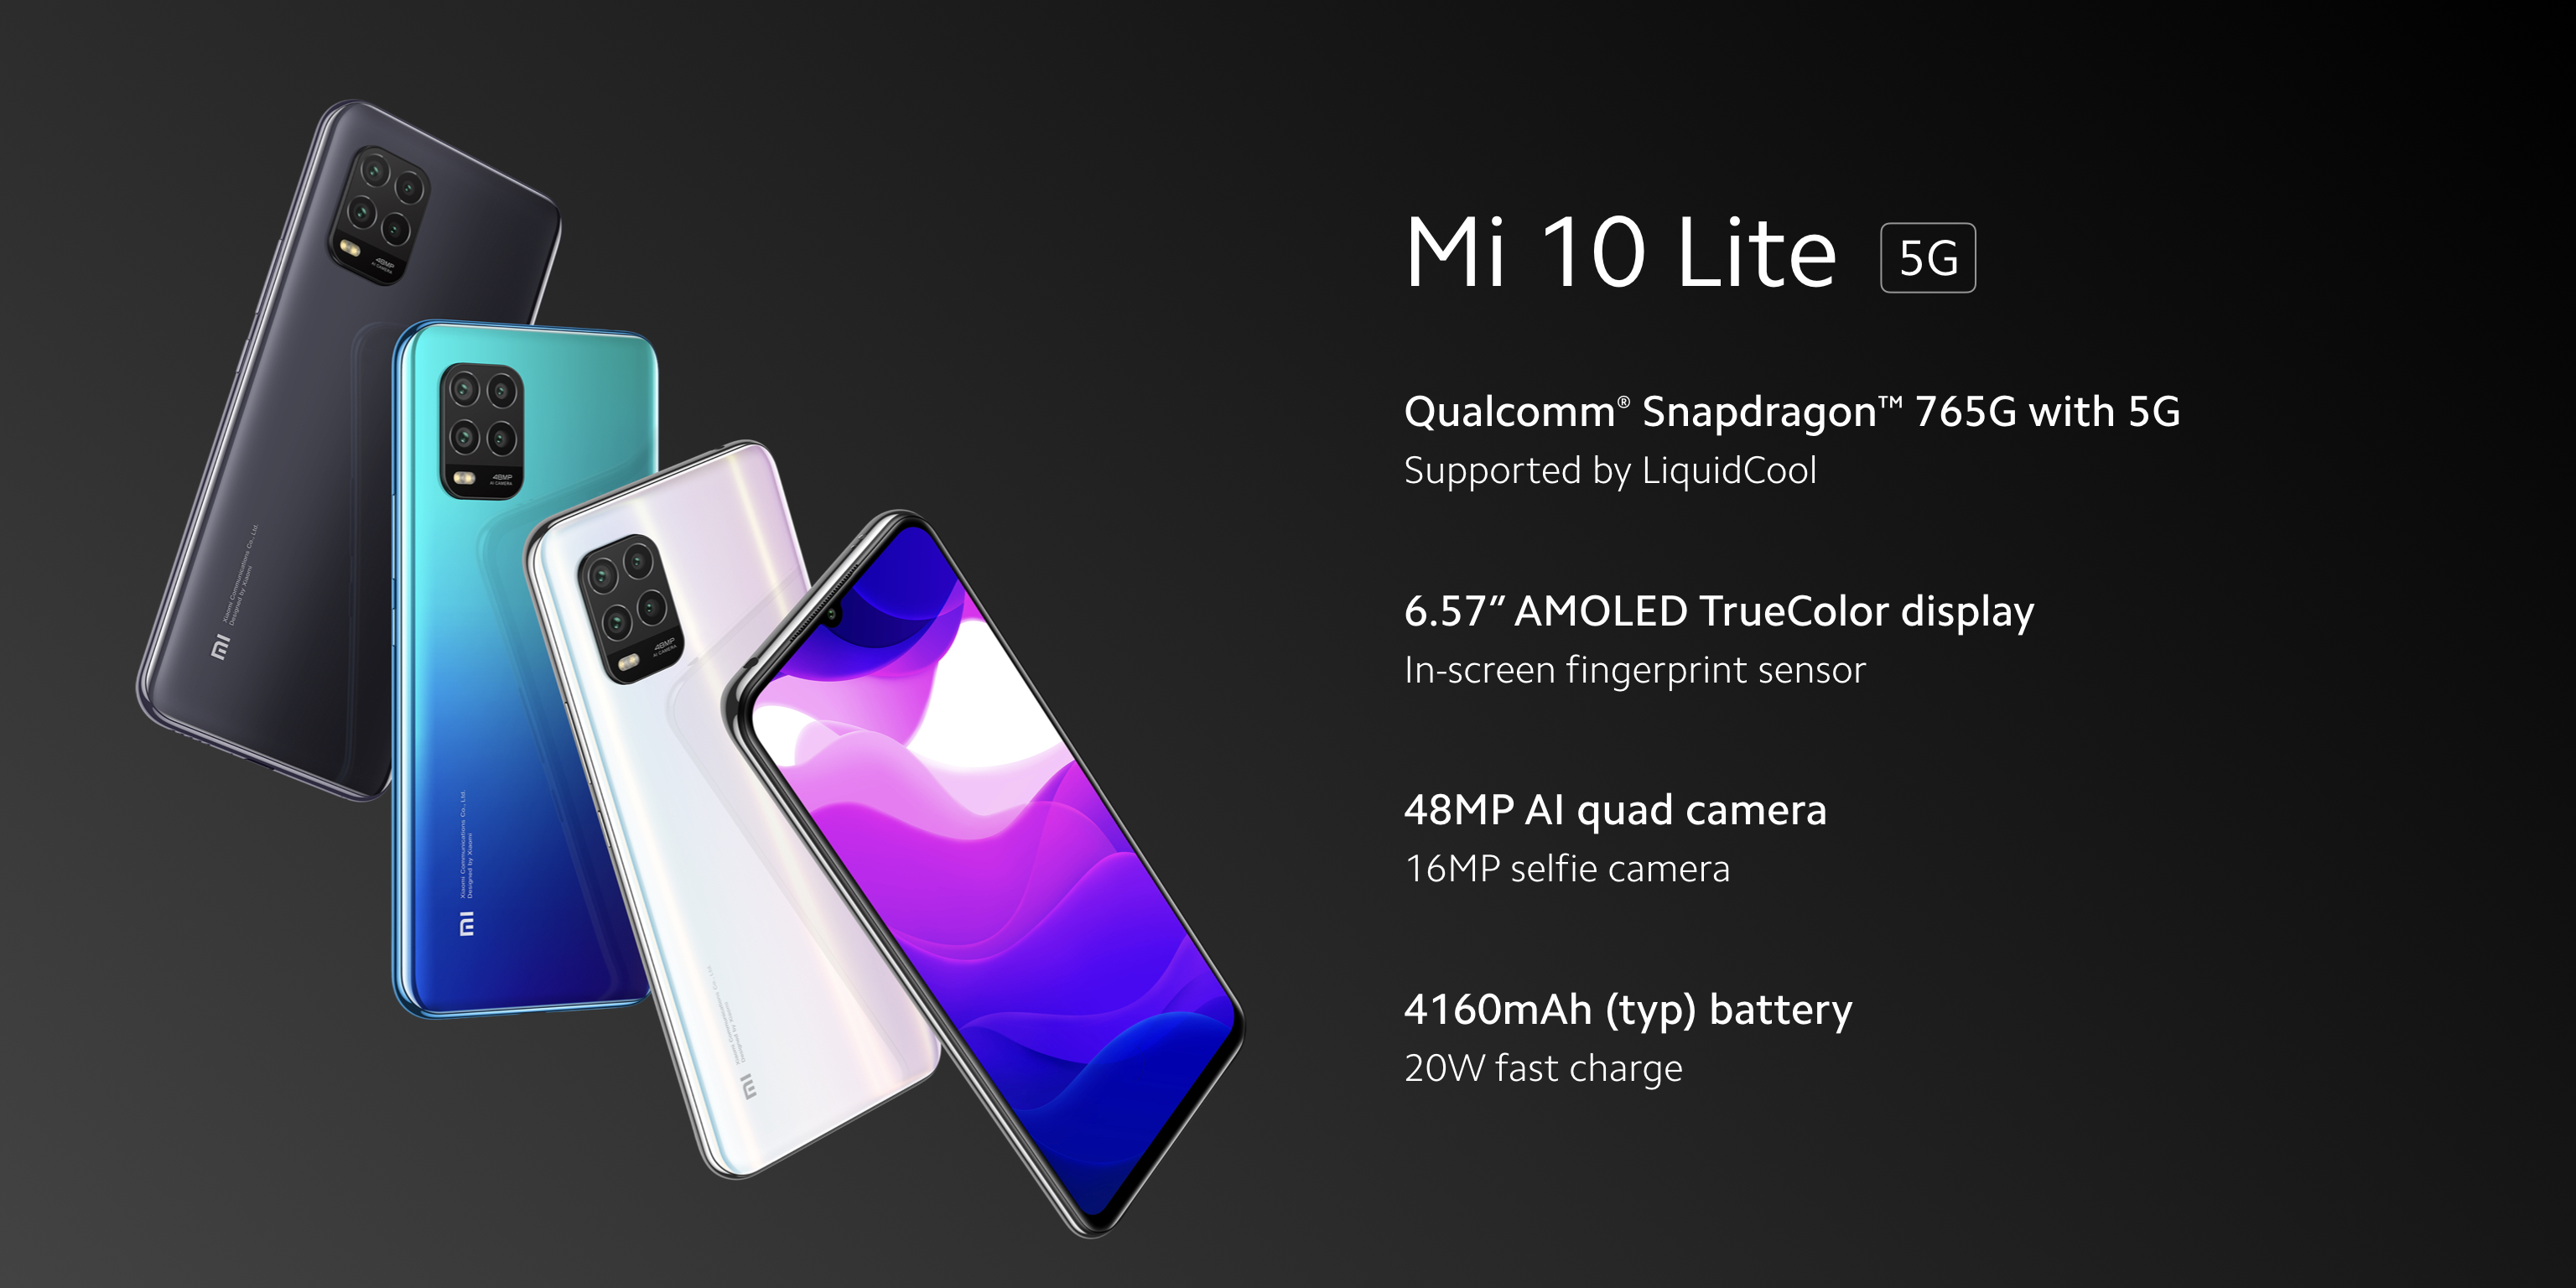 Xiaomi Mi 10 Lite 5G announced in Europe with a Snapdragon 765G SoC and